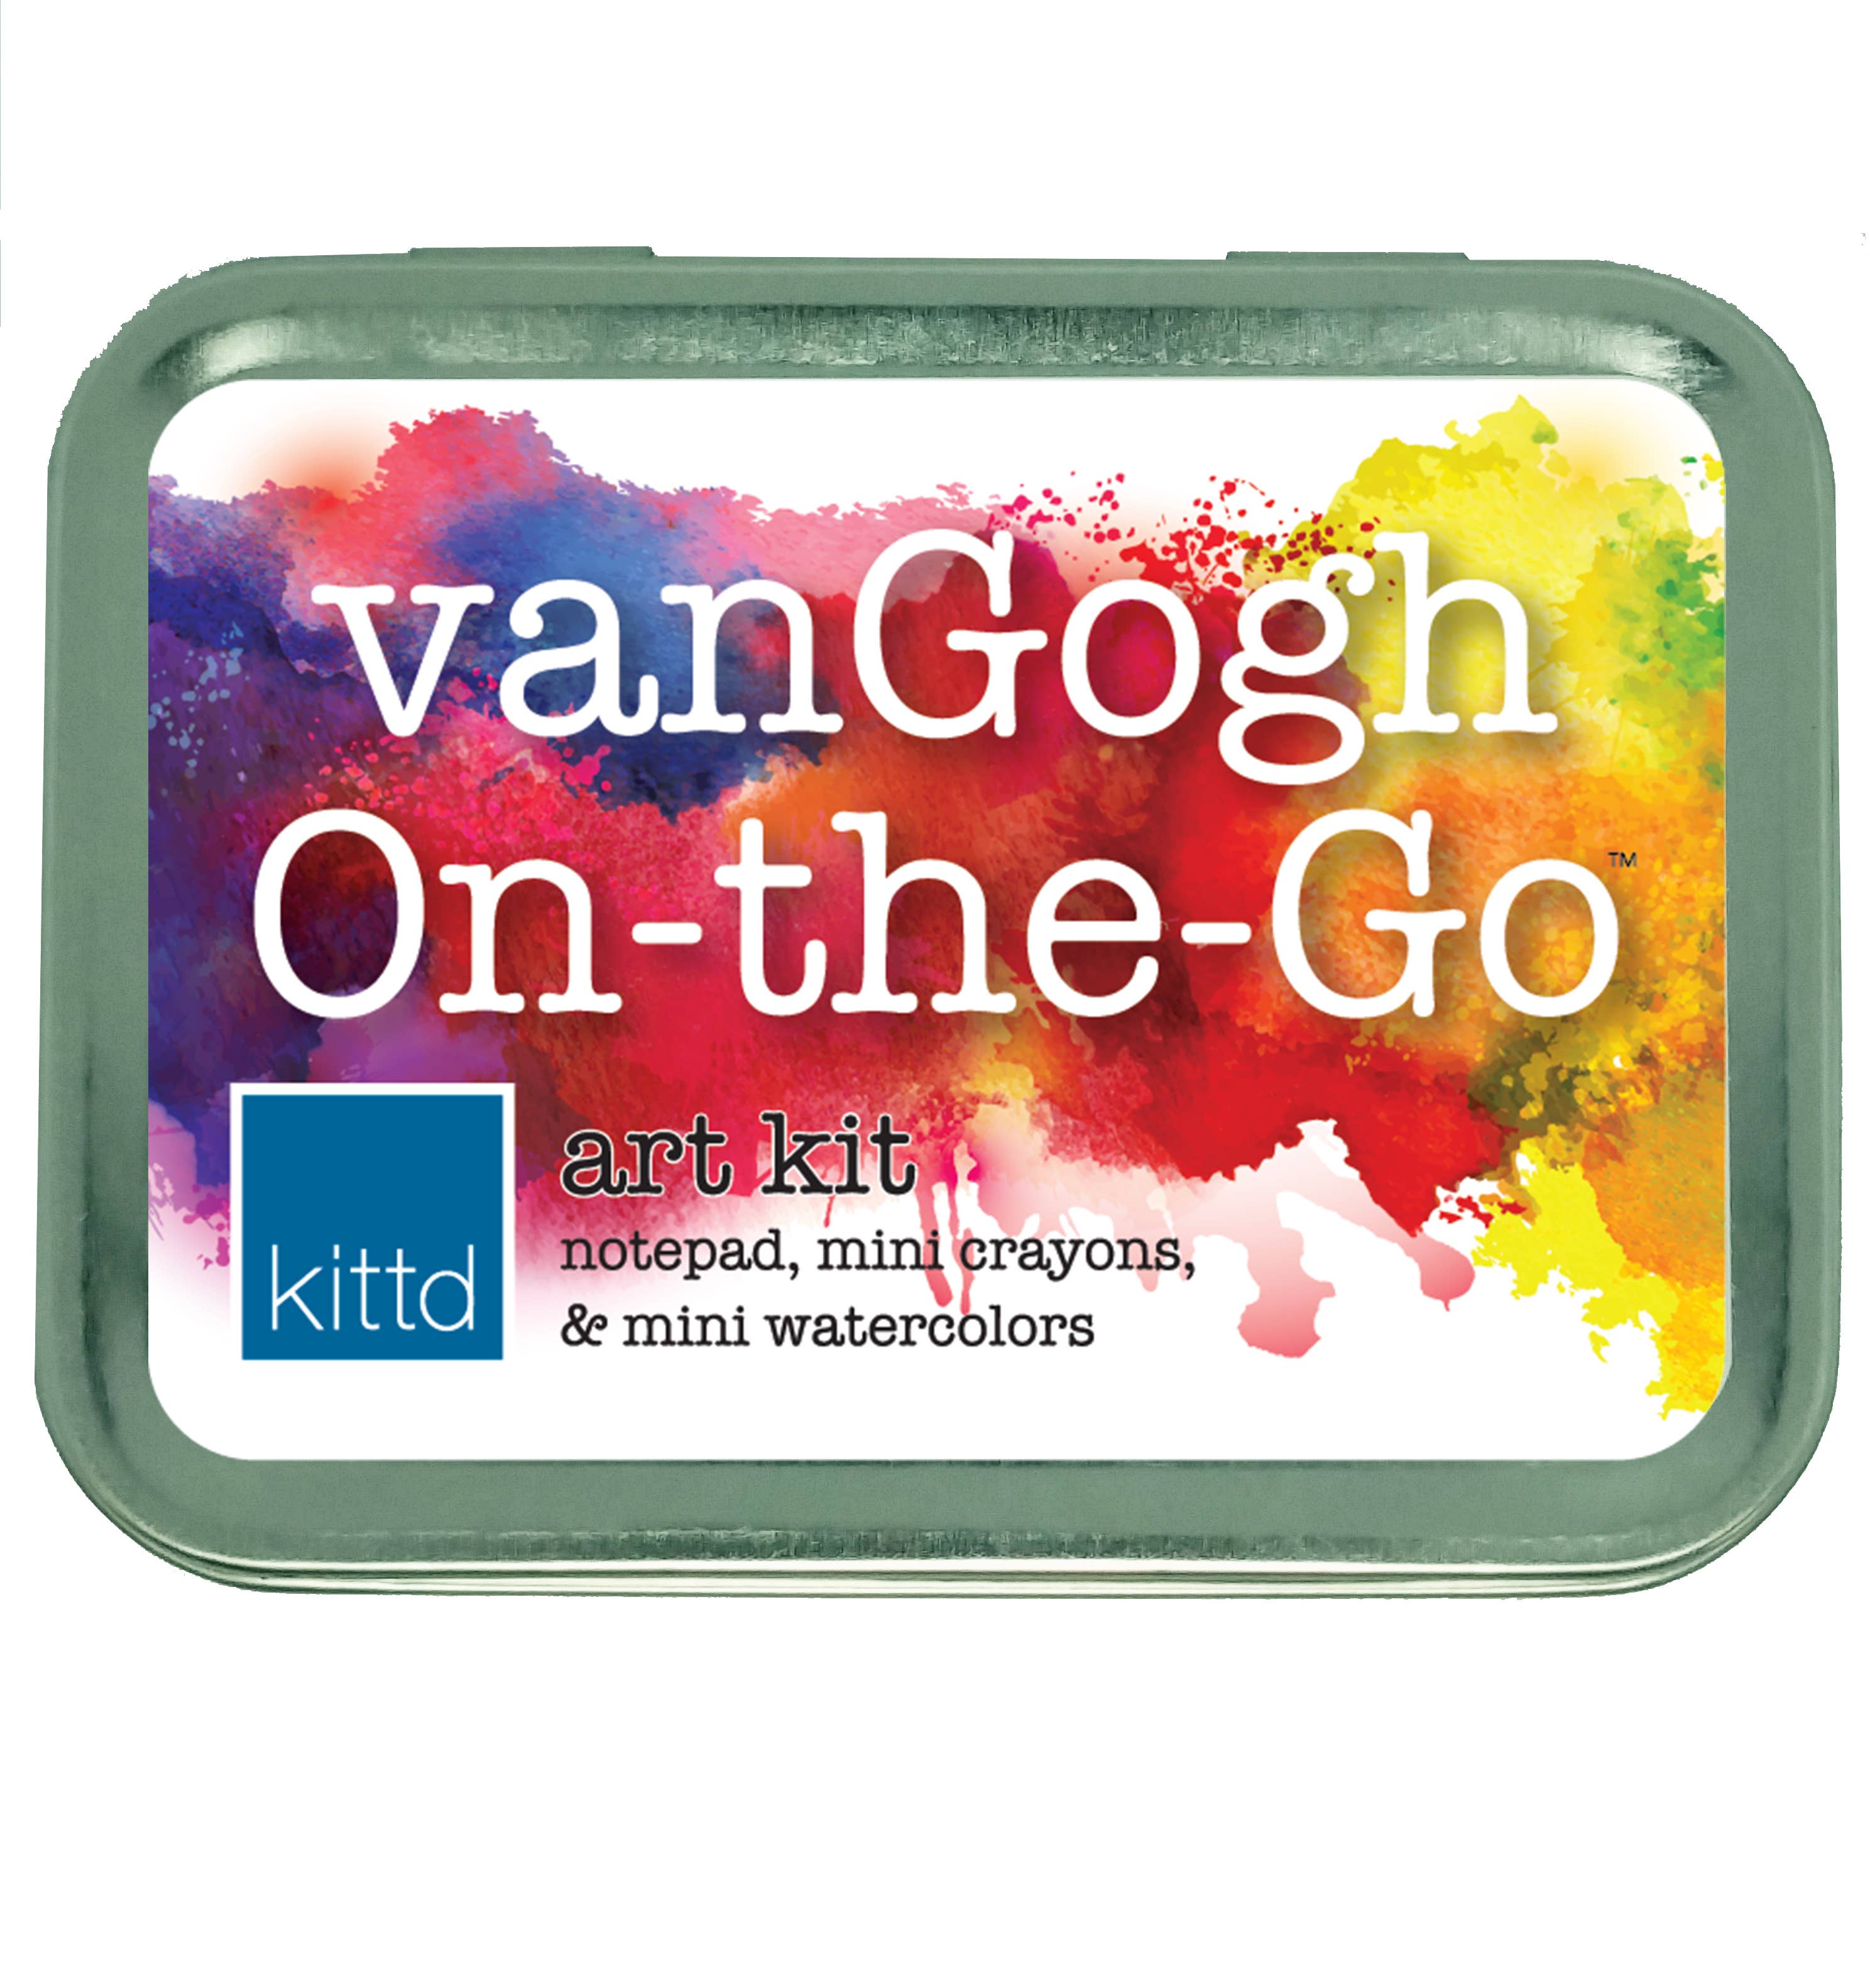 Wholesale vanGogh On-the-Go Kids Travel Art Play Set for your store